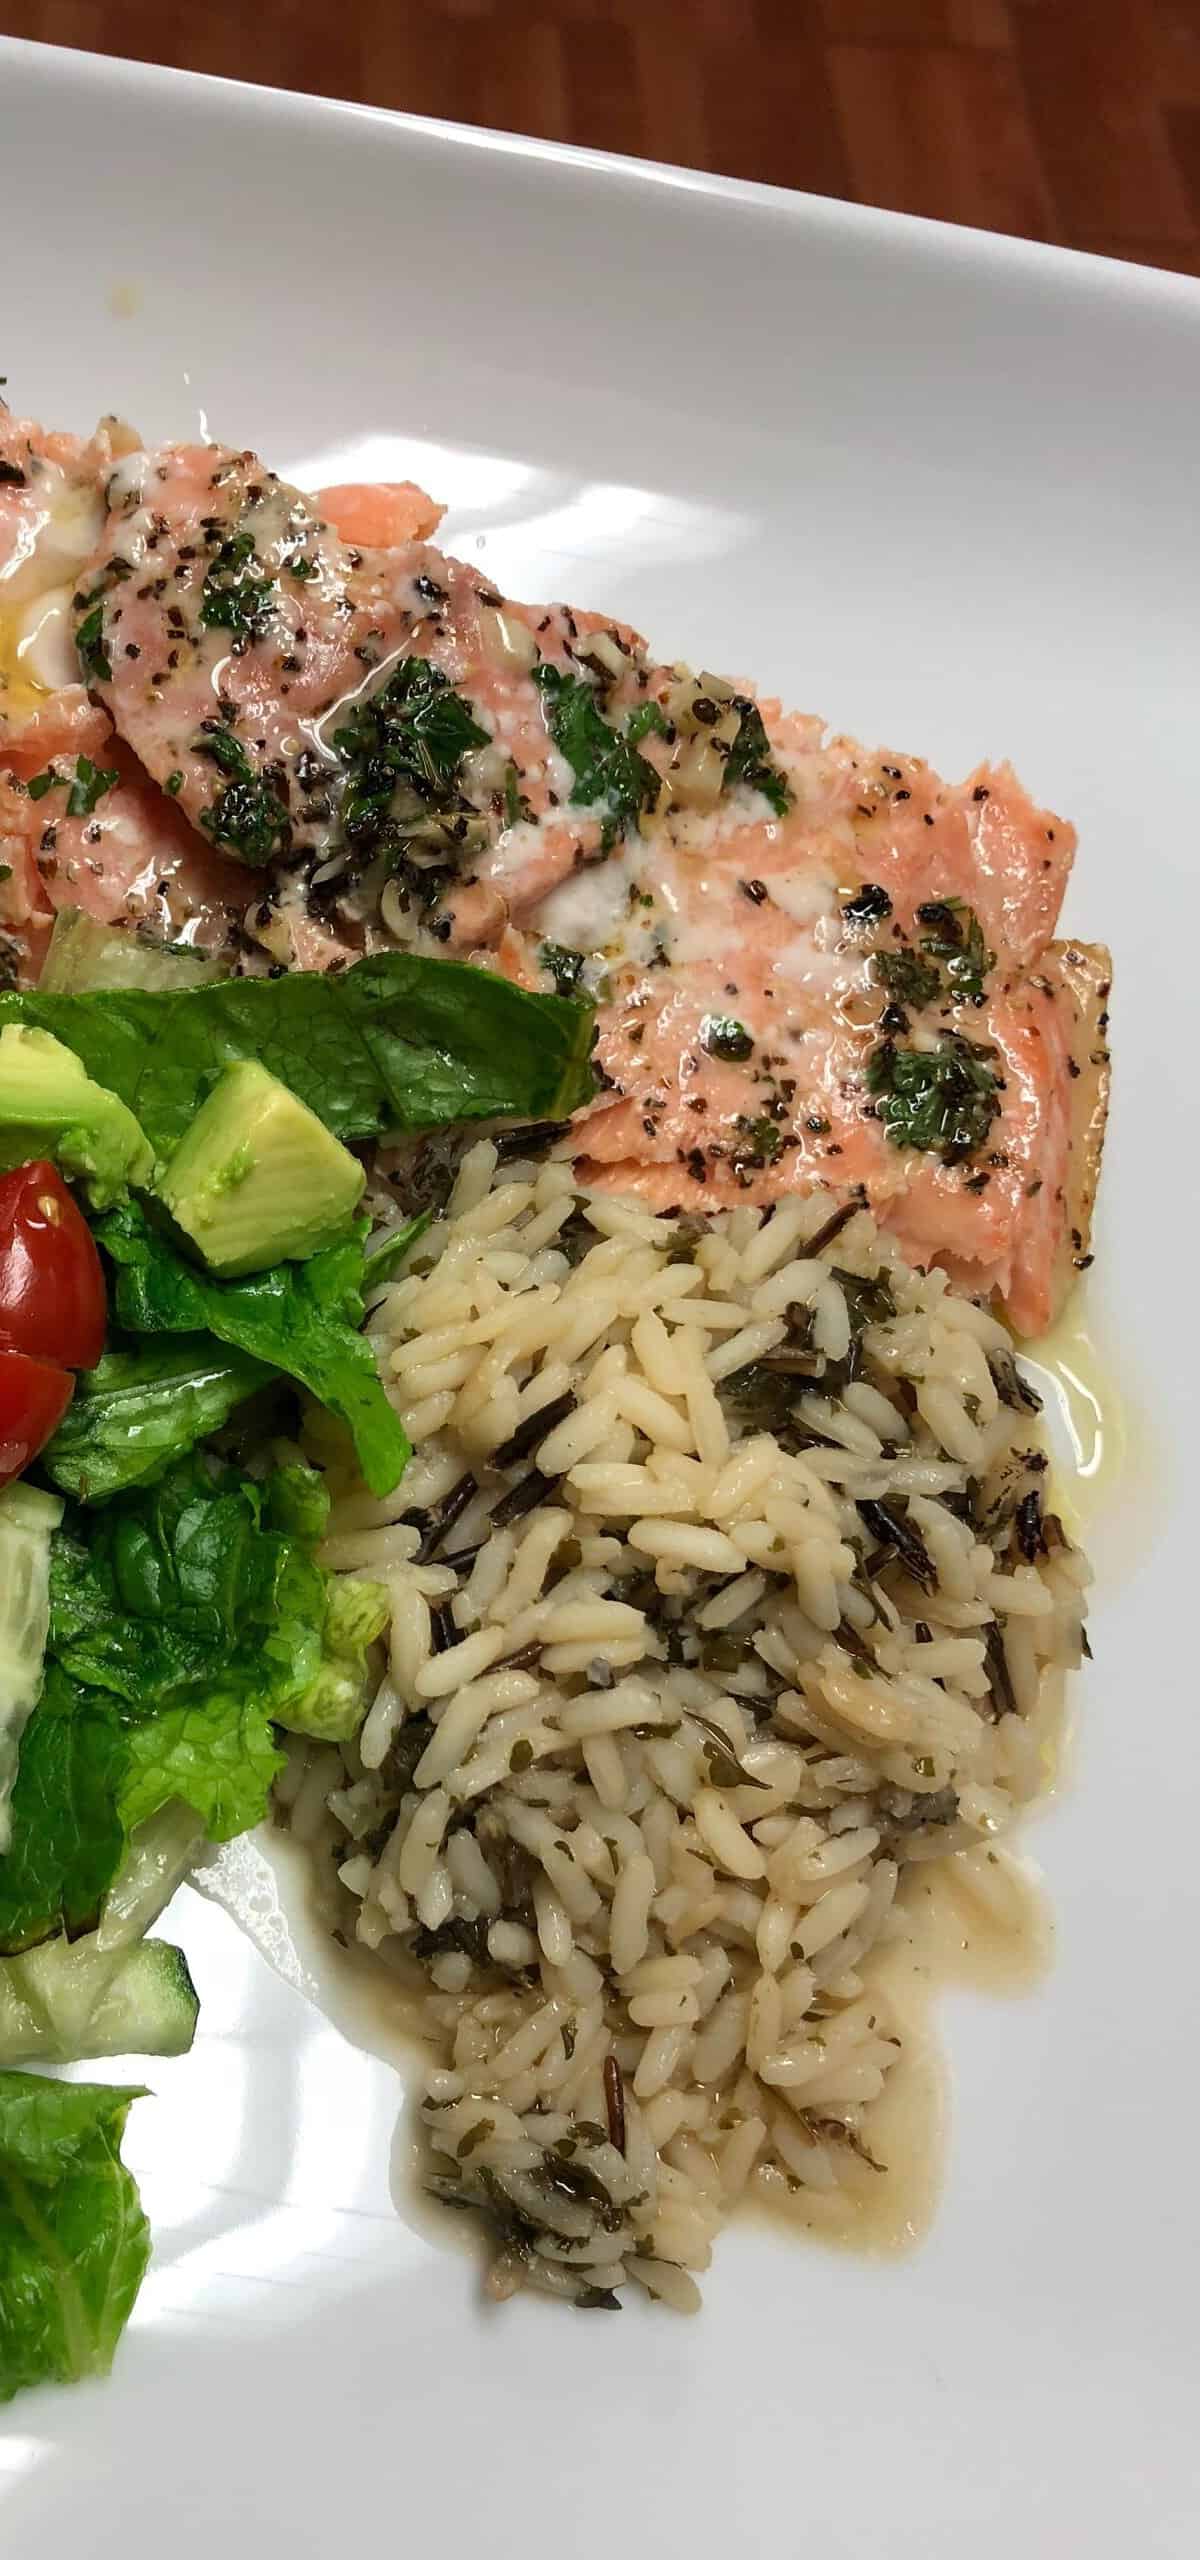  Dive into this decadent salmon dish!